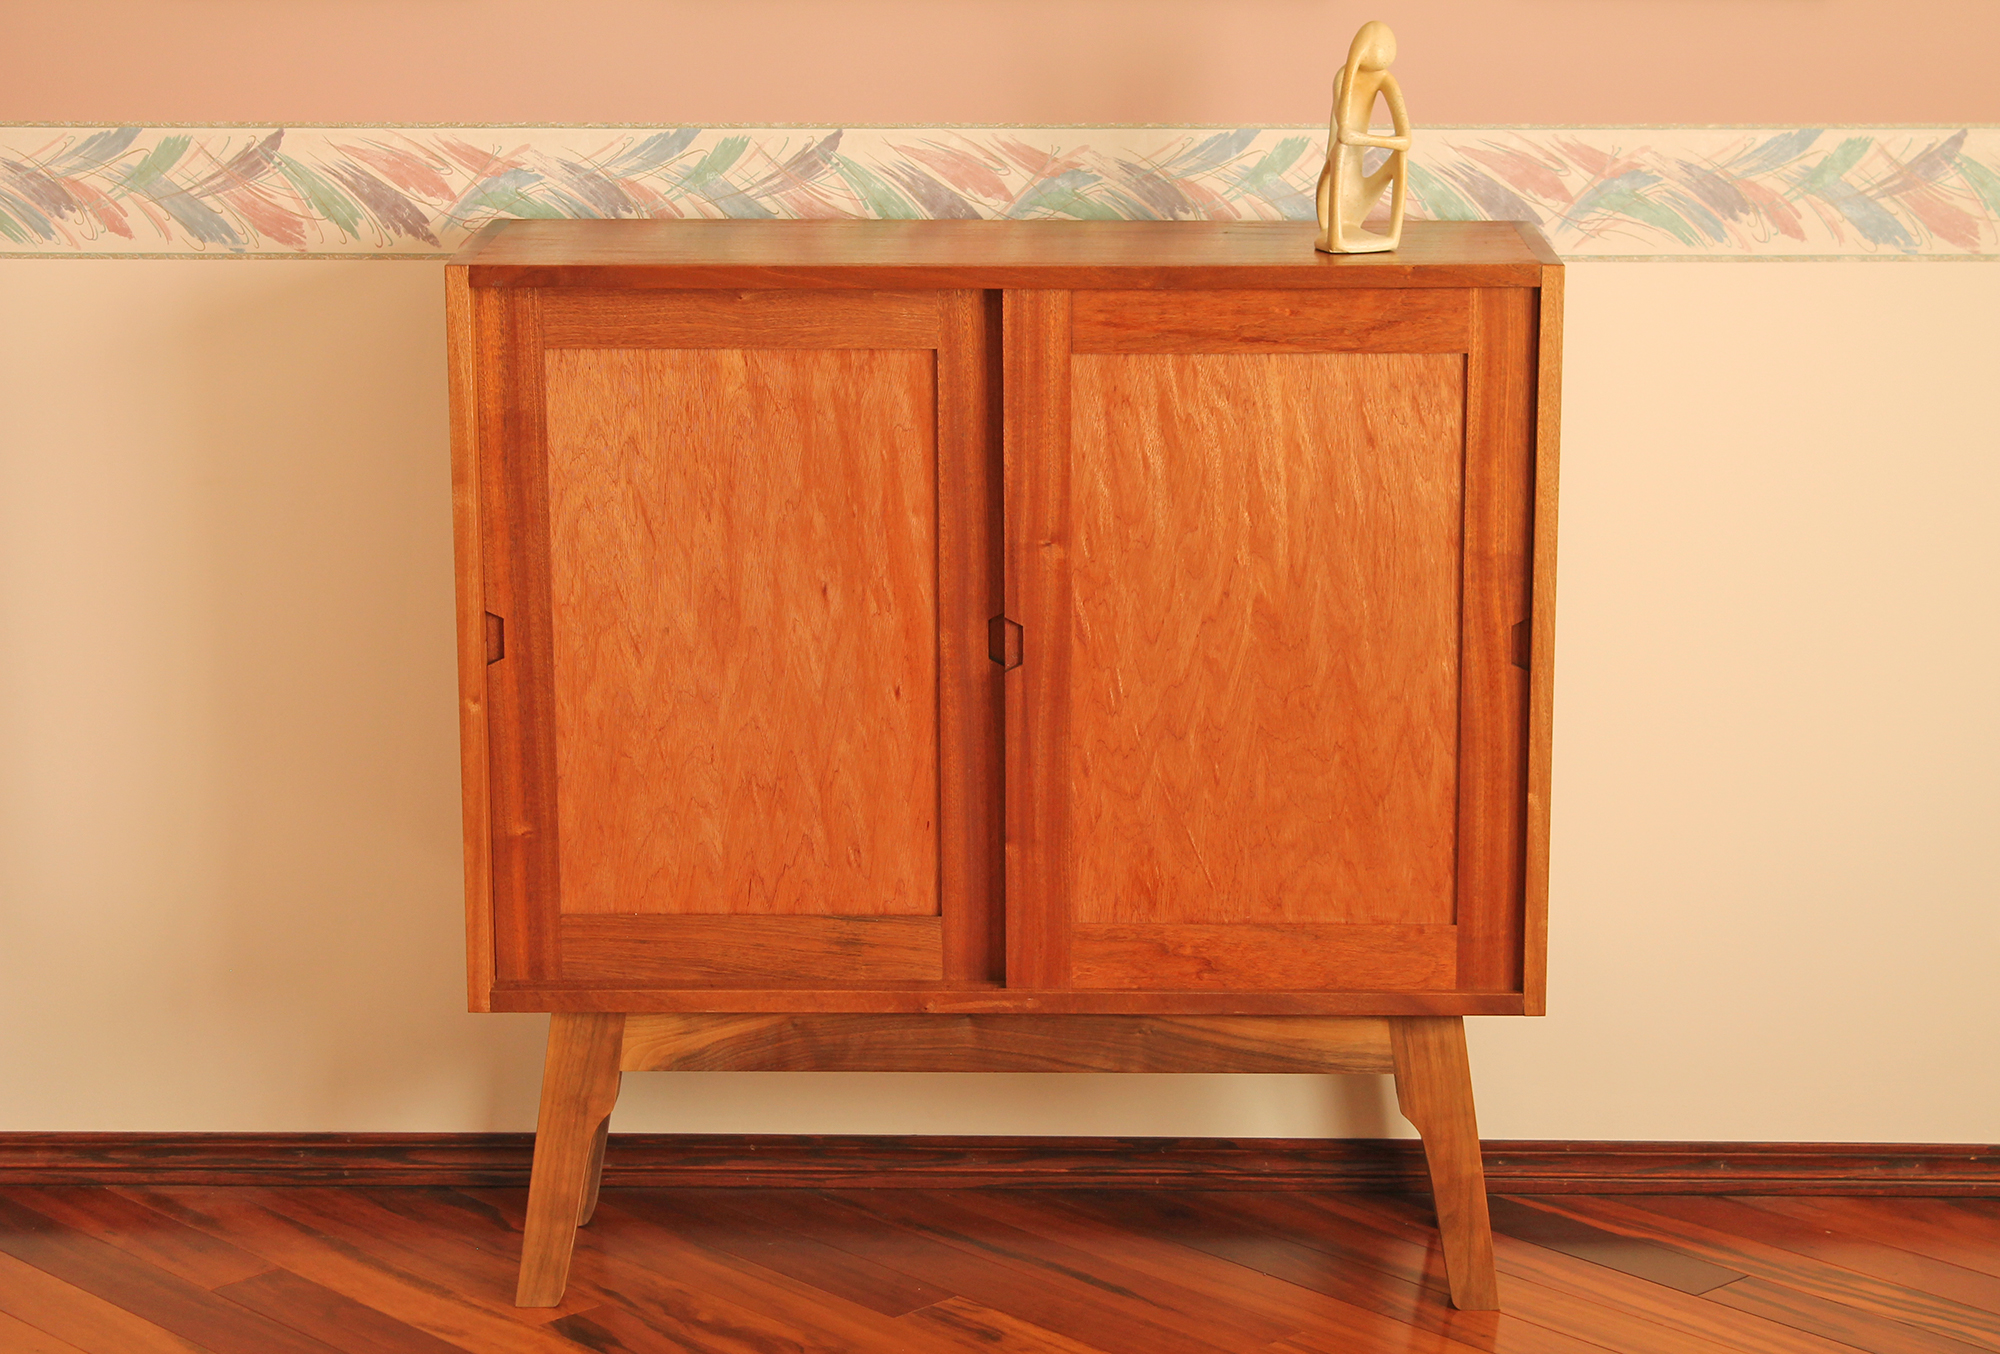 This credenza’s design was restricted by storage needs and space confinements.